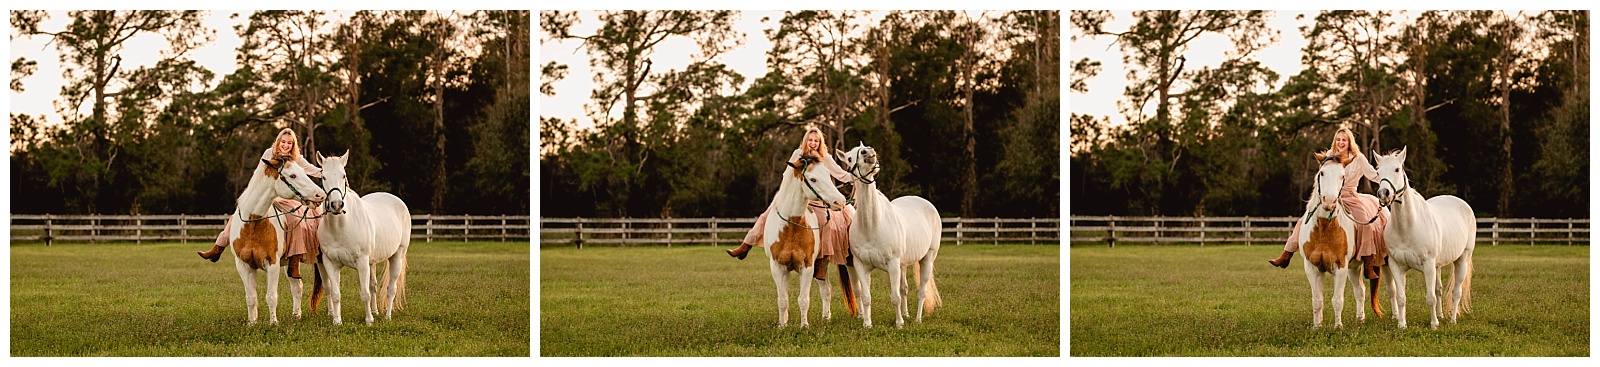 Funny photos of girl with her two horses during sunset in Fort Myers.